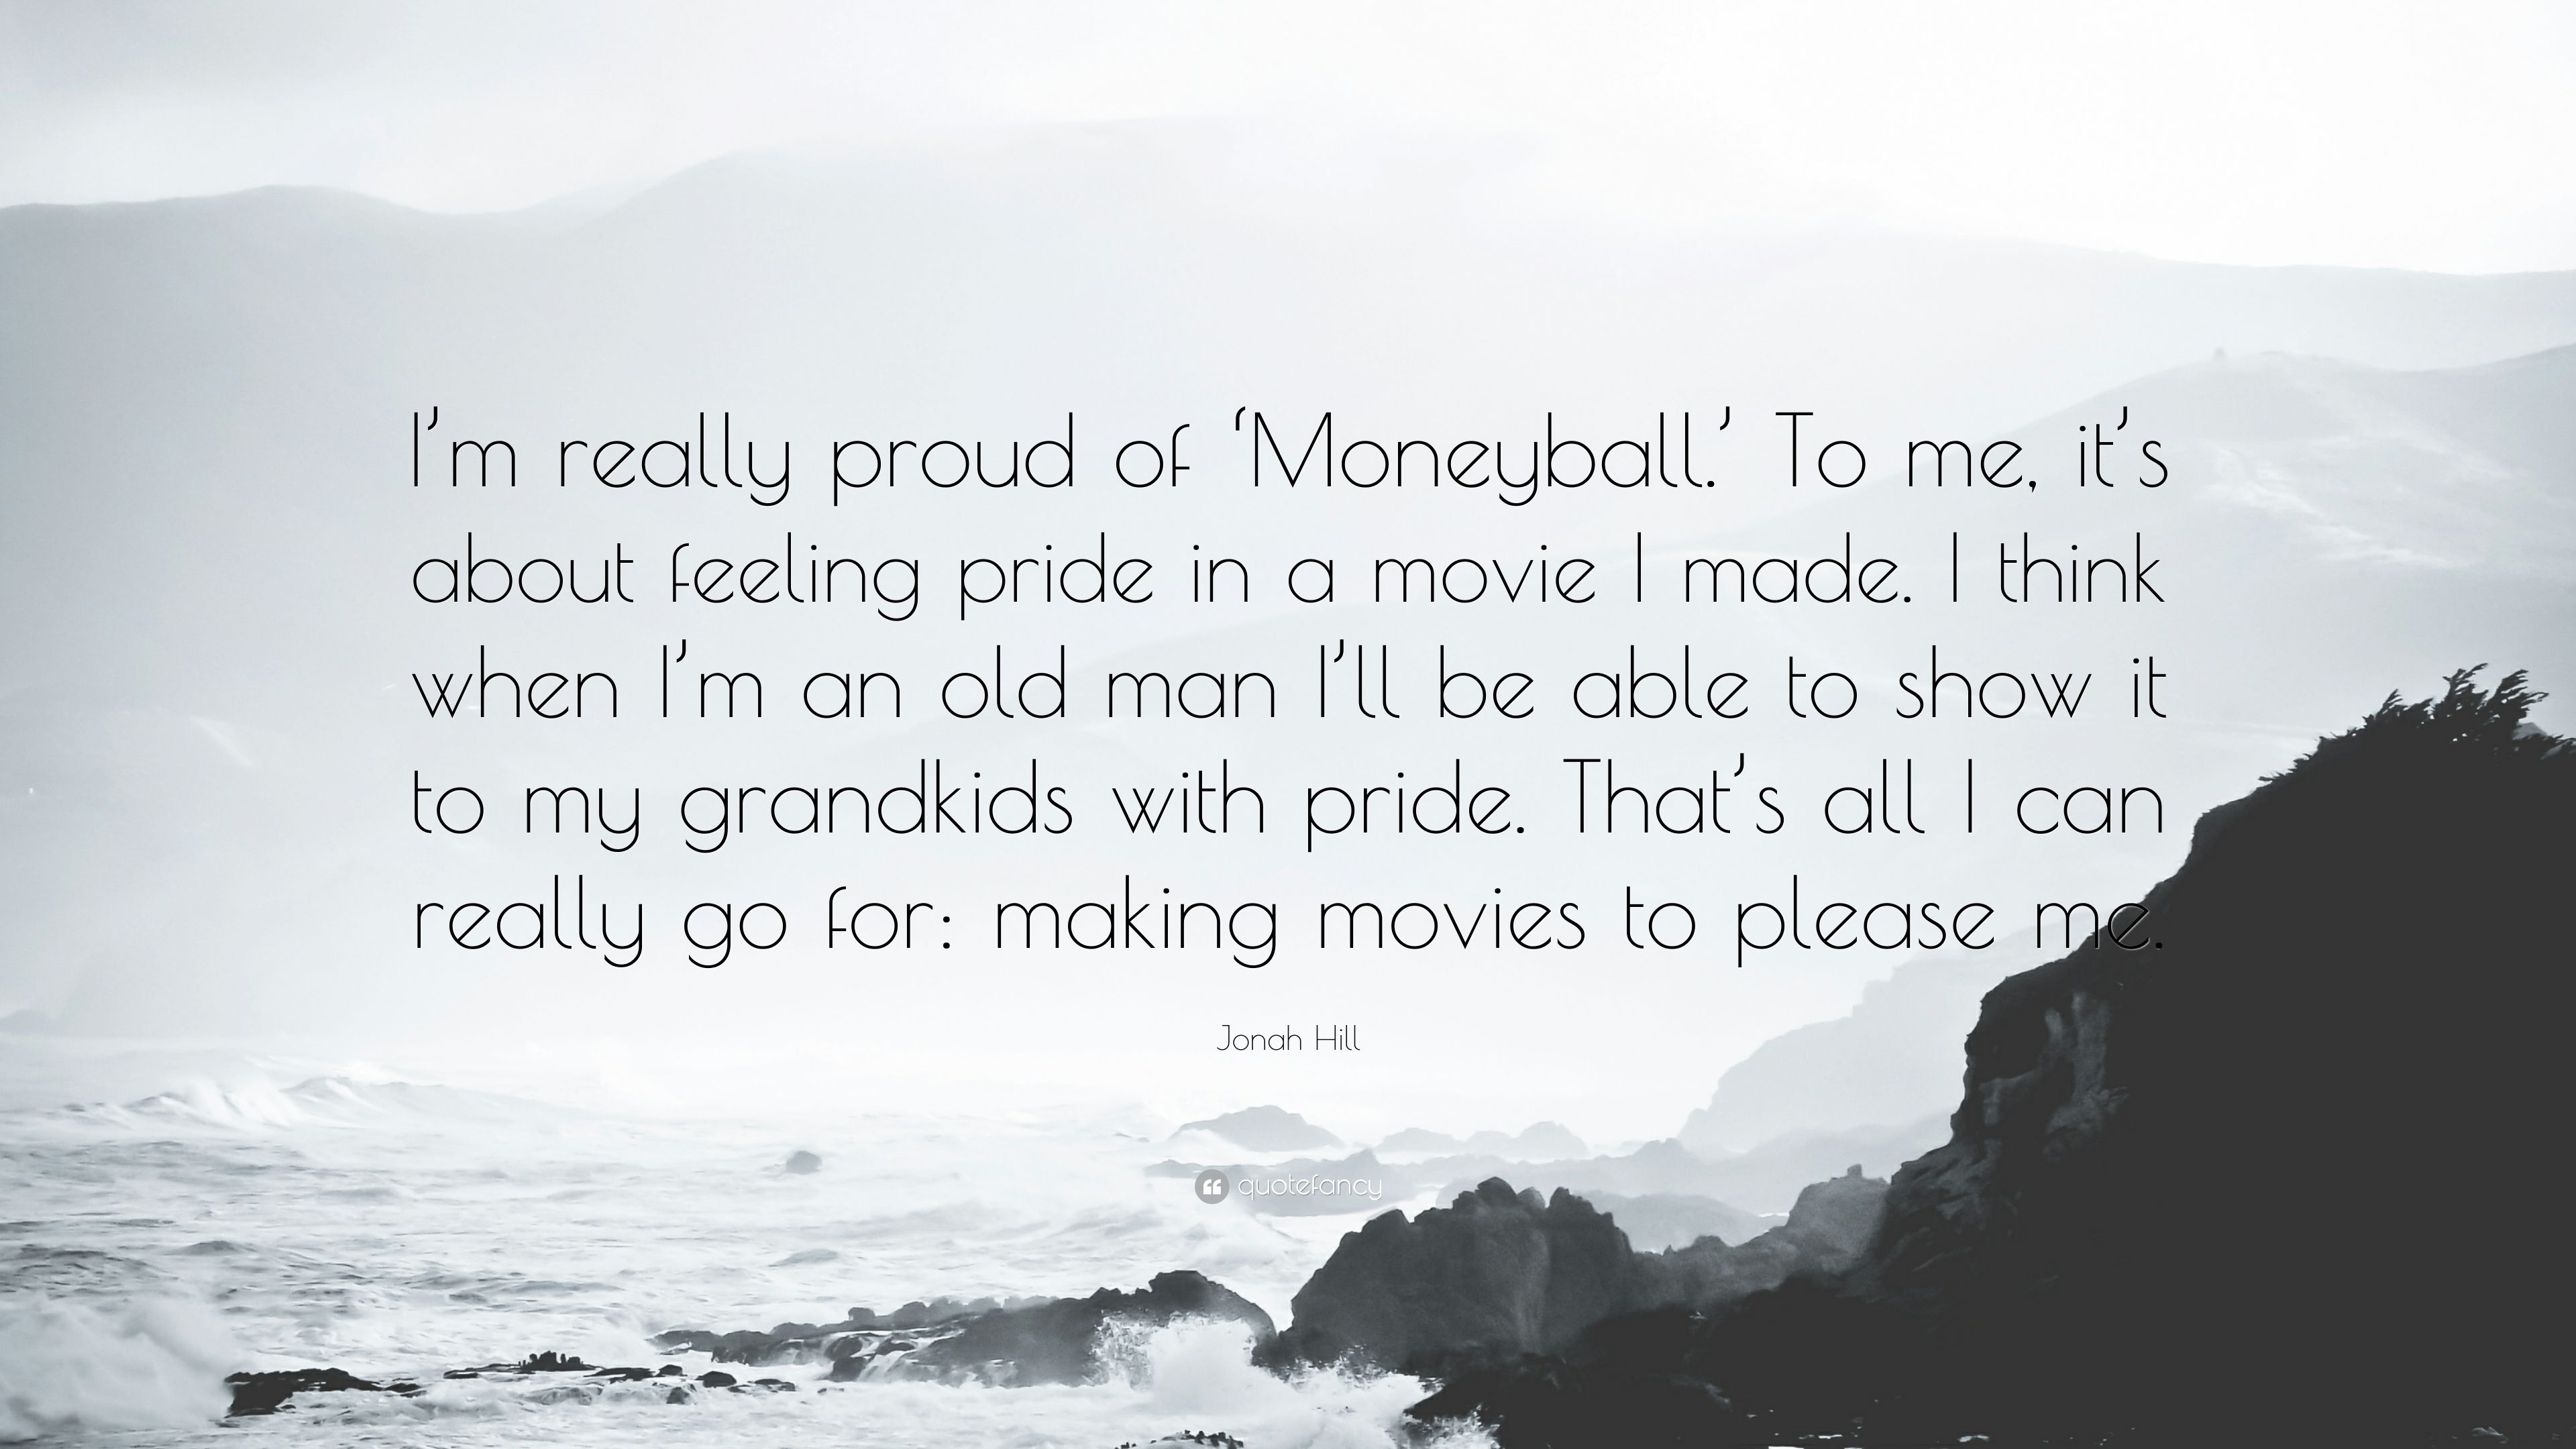 Jonah Hill Quote: “I'm really proud of 'Moneyball.' To me, it's about feeling pride in a movie I made. I think when I'm an old man I'll be .” (7 wallpaper)